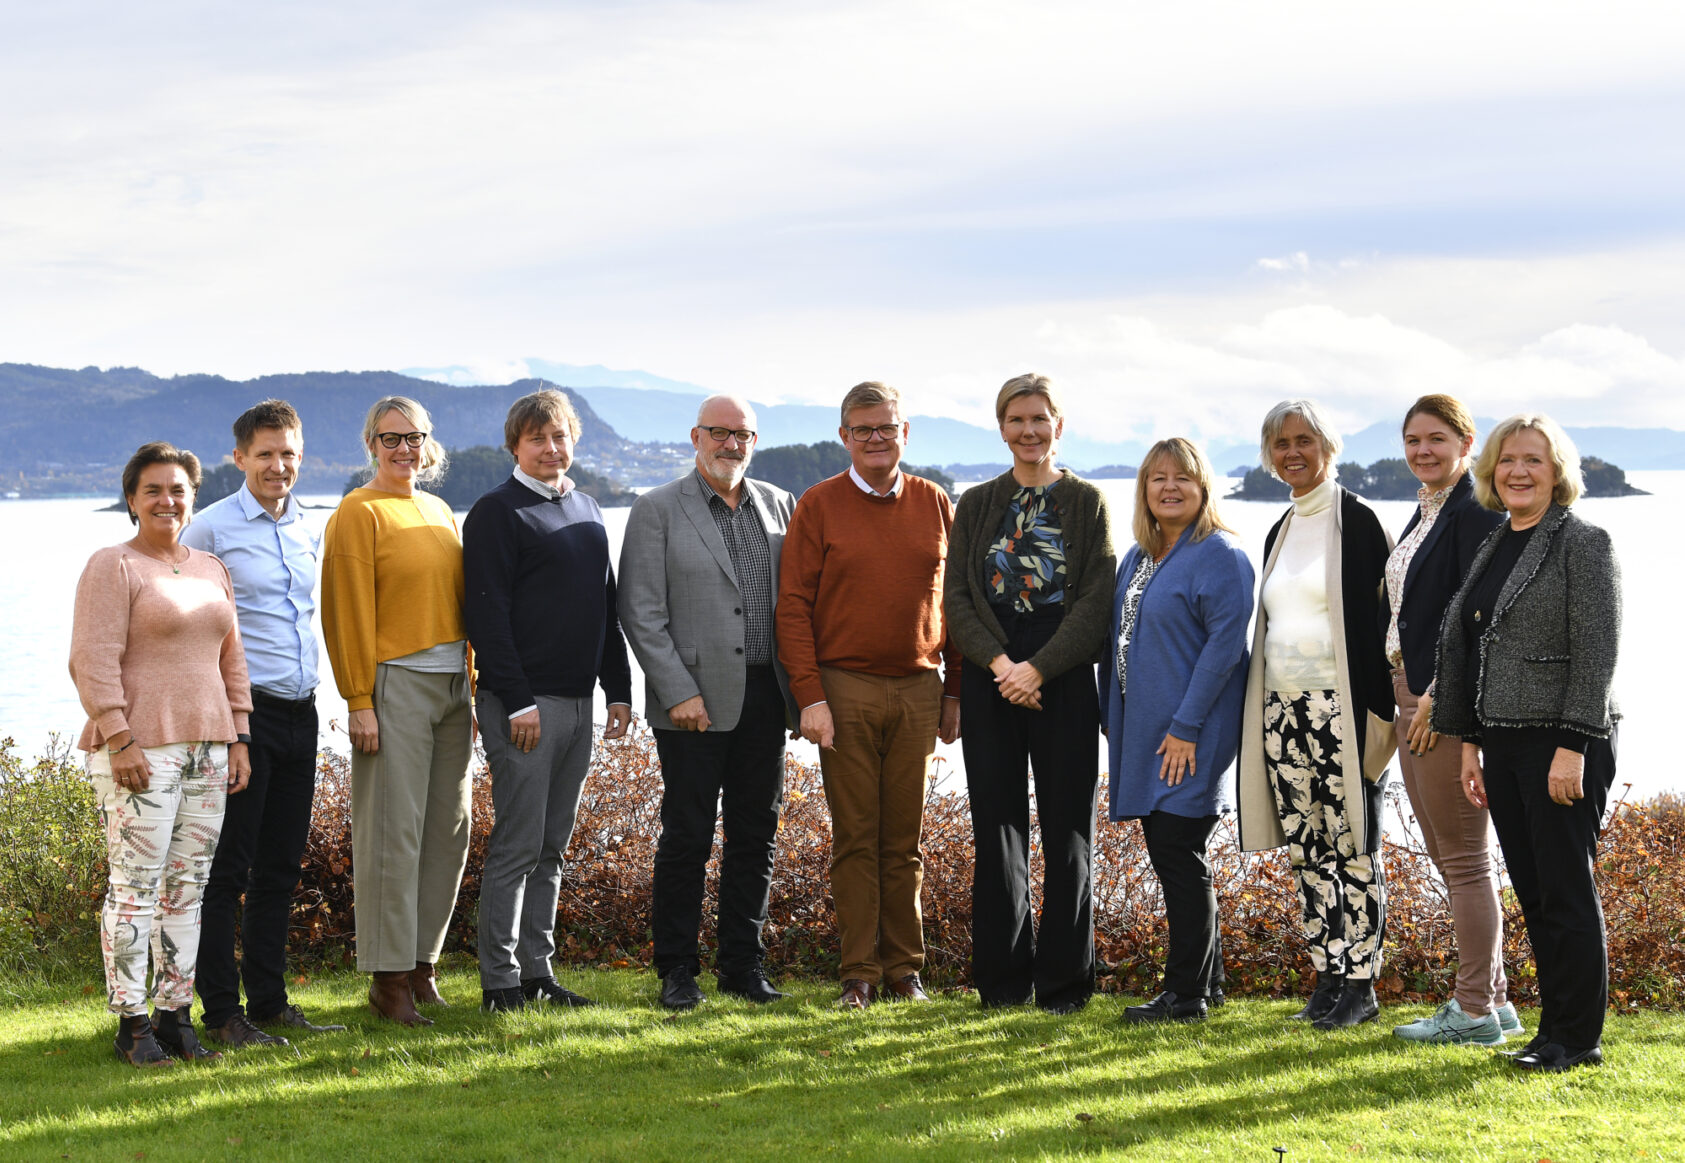 Marit Hommedal, The board of NORCE autumn 2022, Styret høst 2022 NORCE Marit Hommedal intranett, <p>Marit Hommedal</p>, Group photo of the boardmembers in NORCE